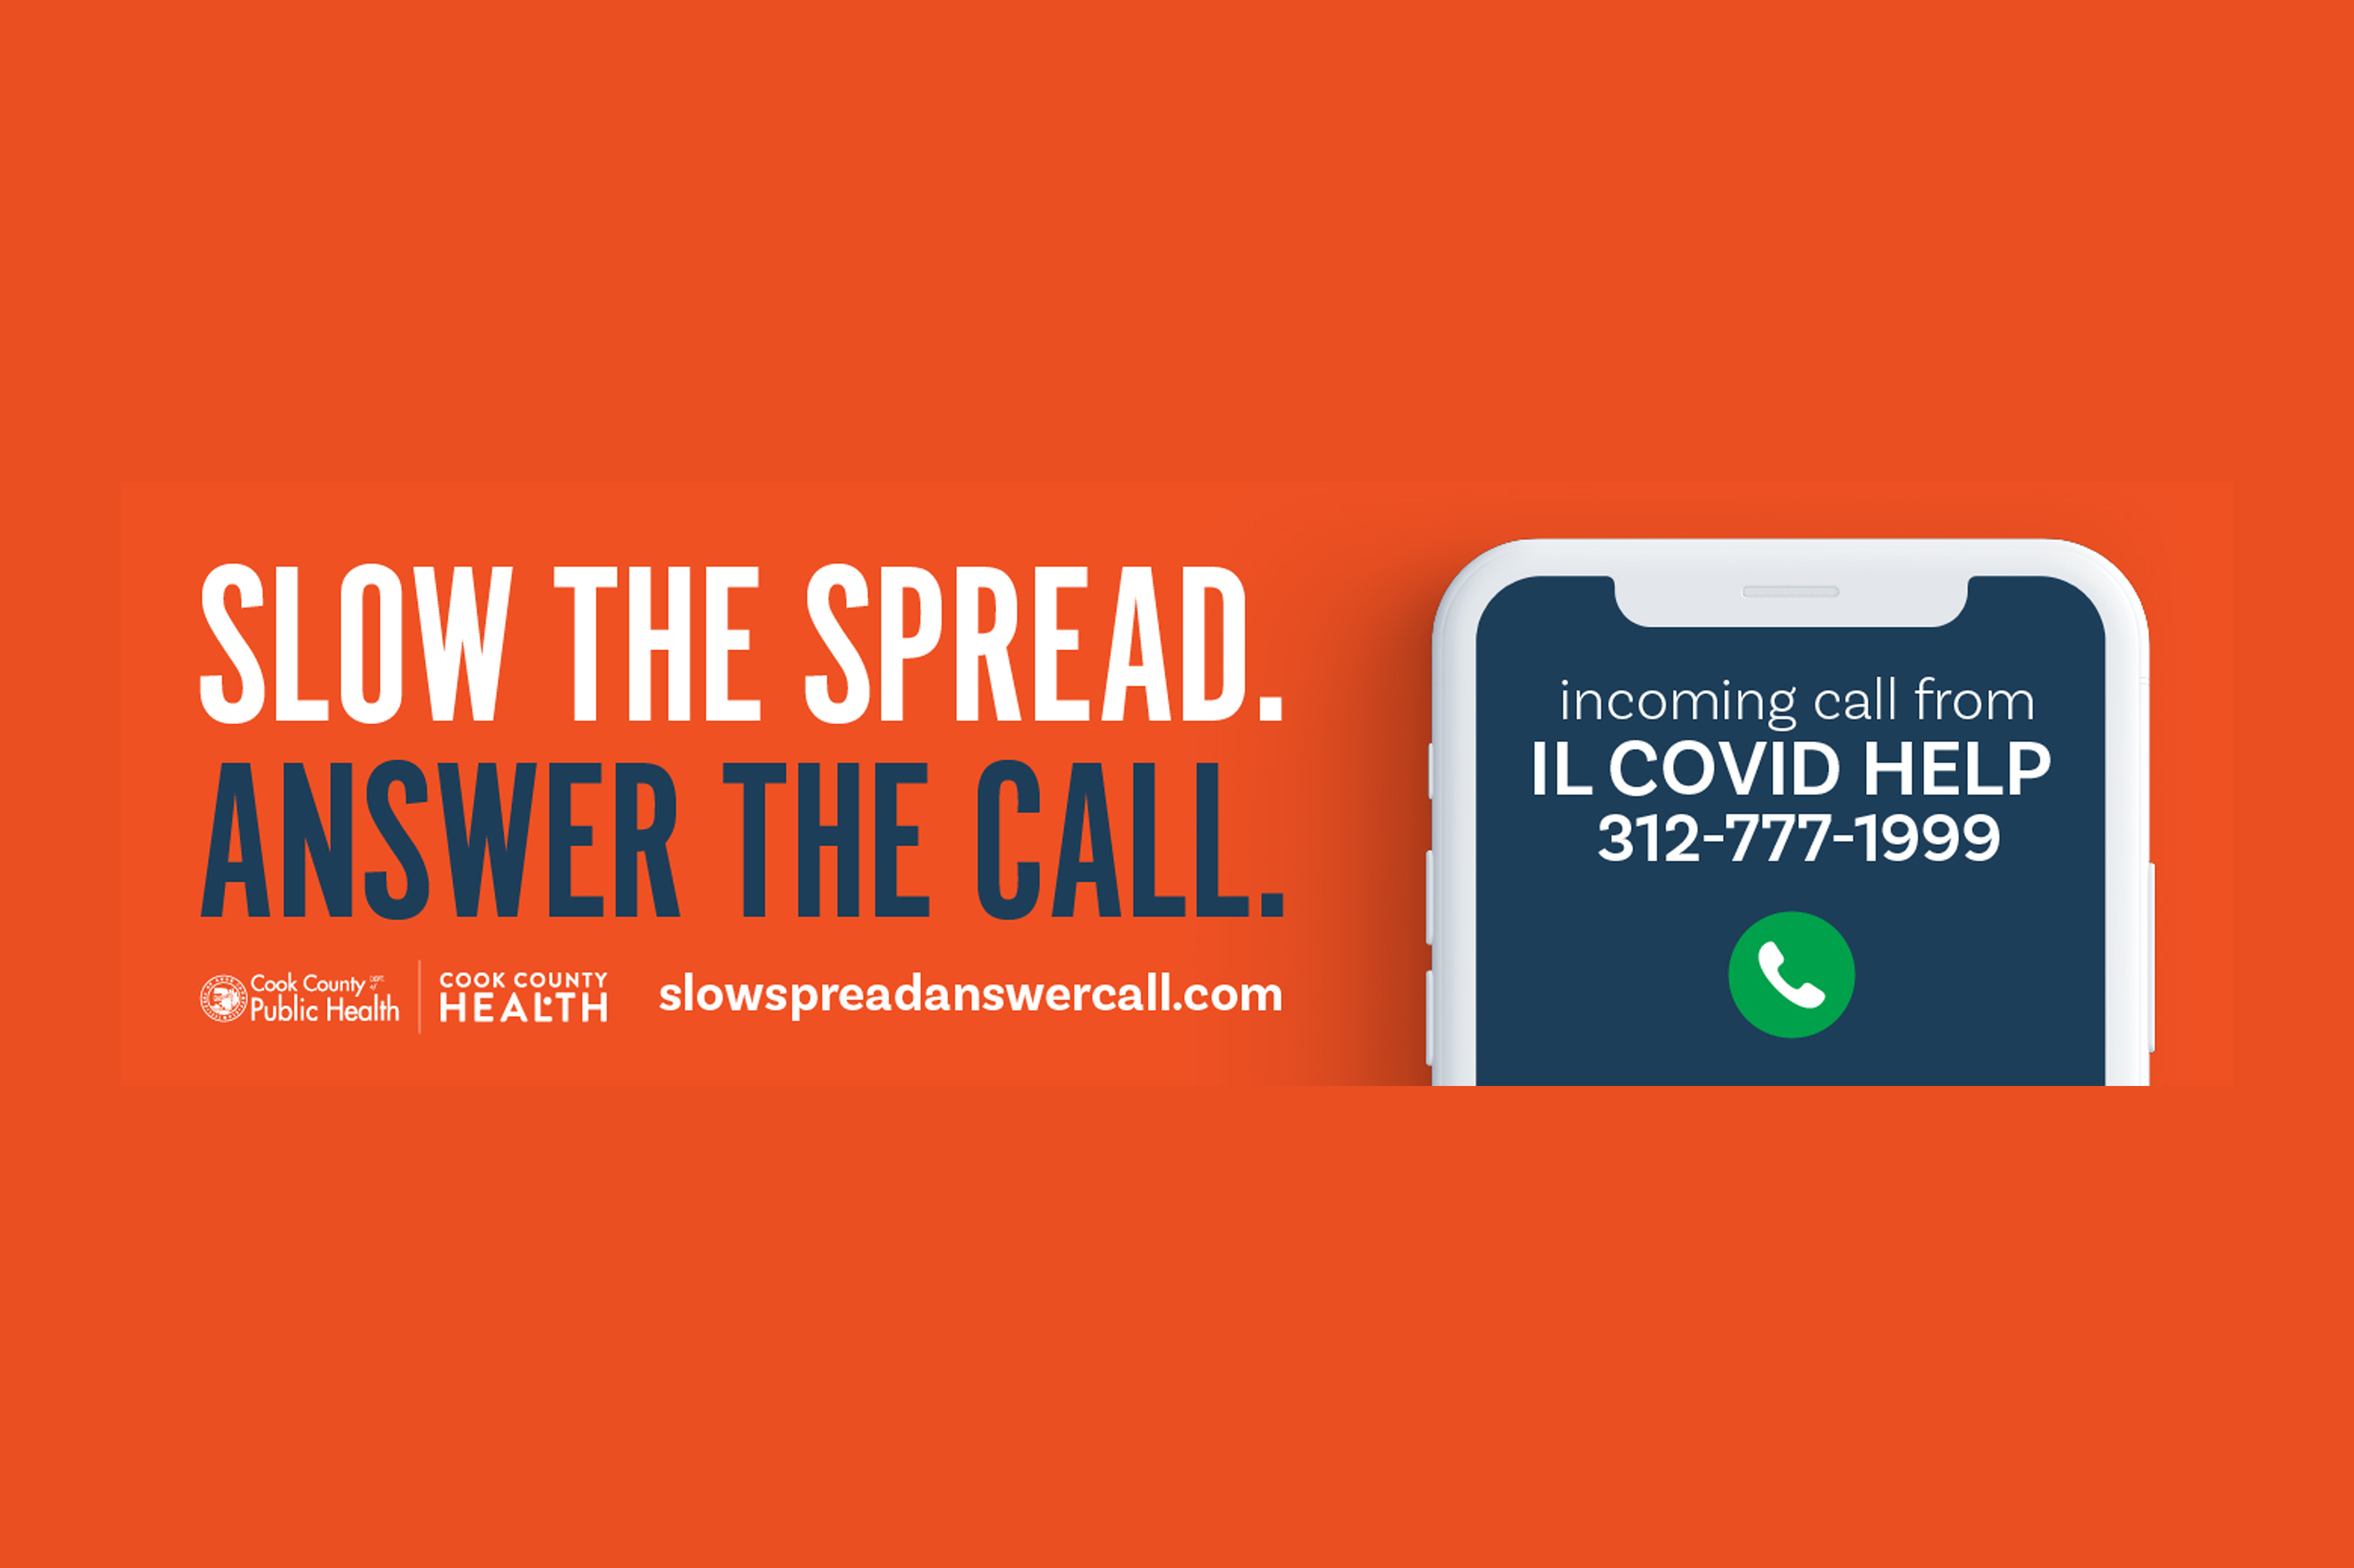 CCDPH's "Answer the Call" campaign/microsite